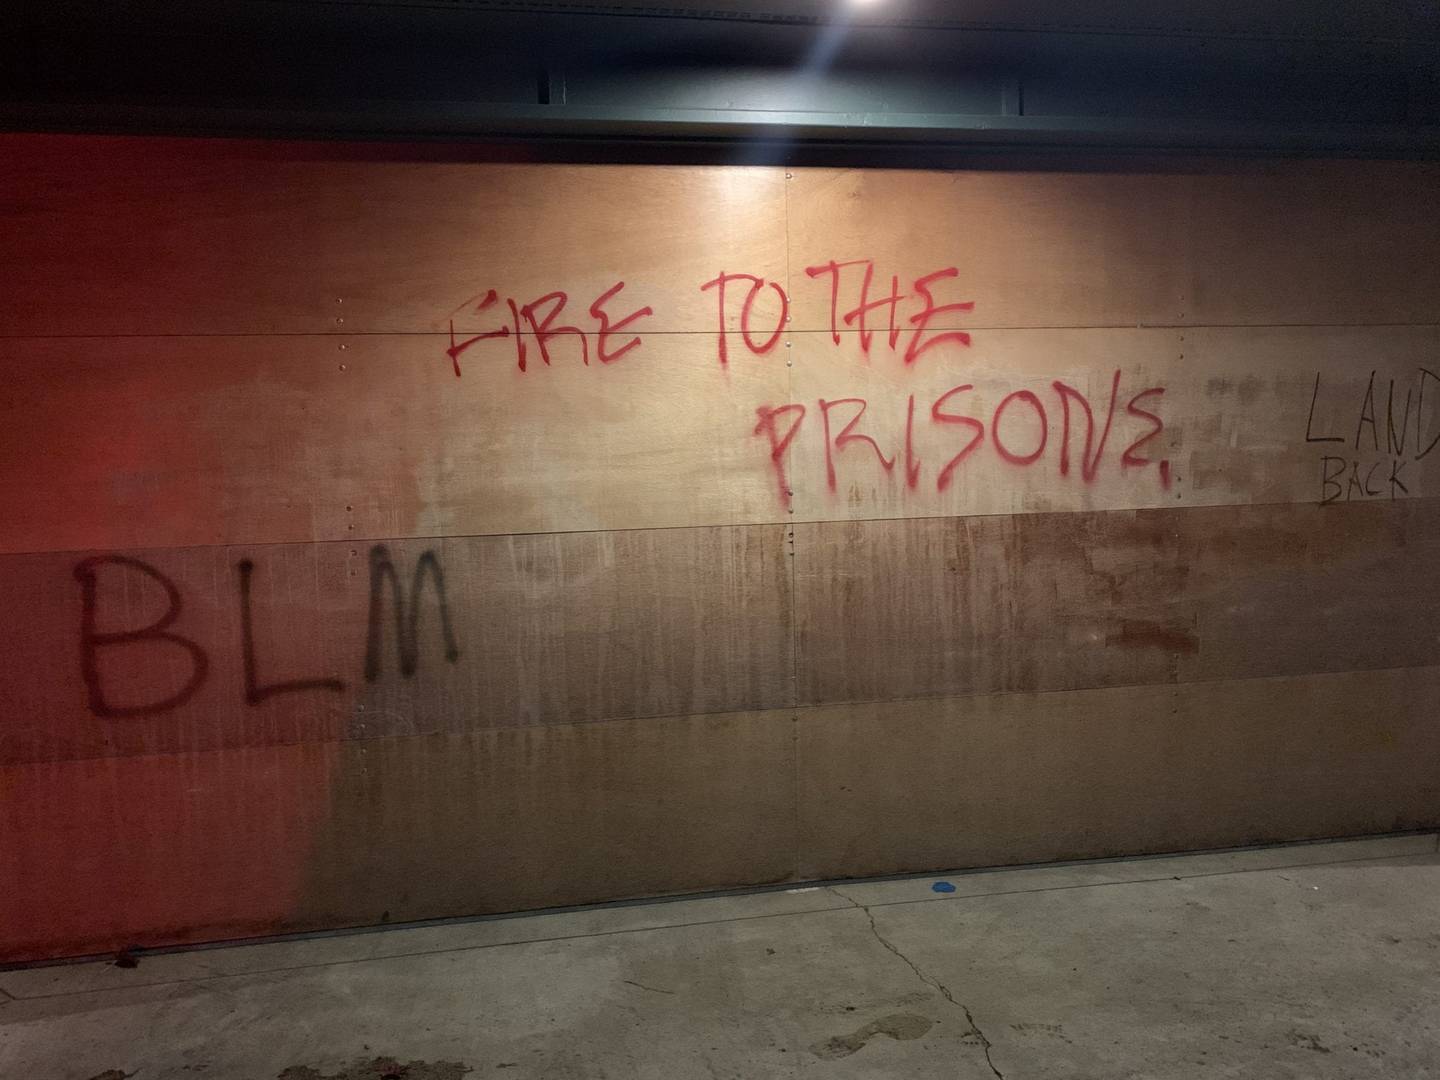 Vandalism done during Capitol Hill protest, 11-30-20